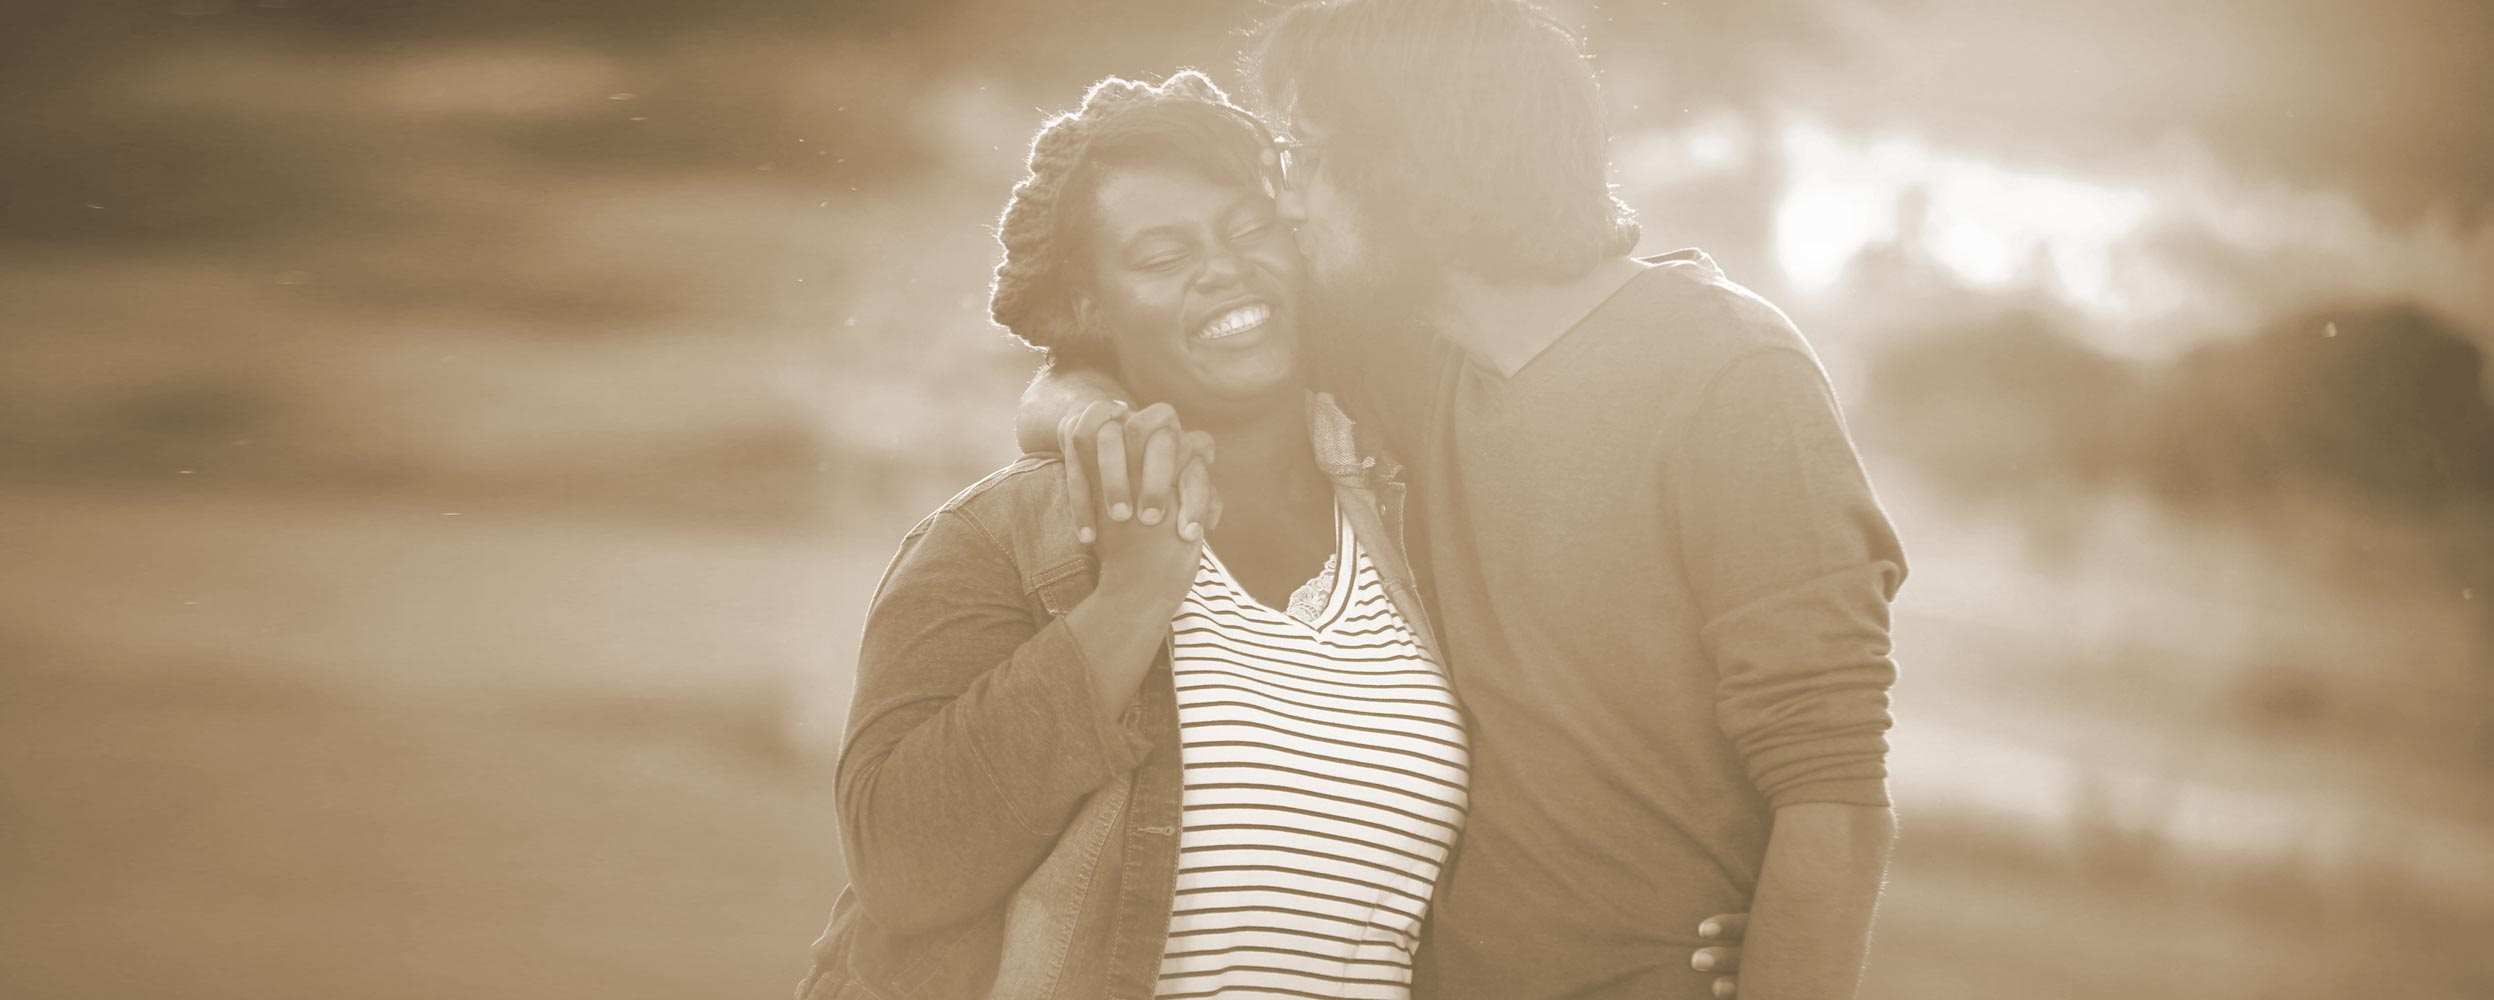 Celebrating diversity: embracing the difficulties of interracial love